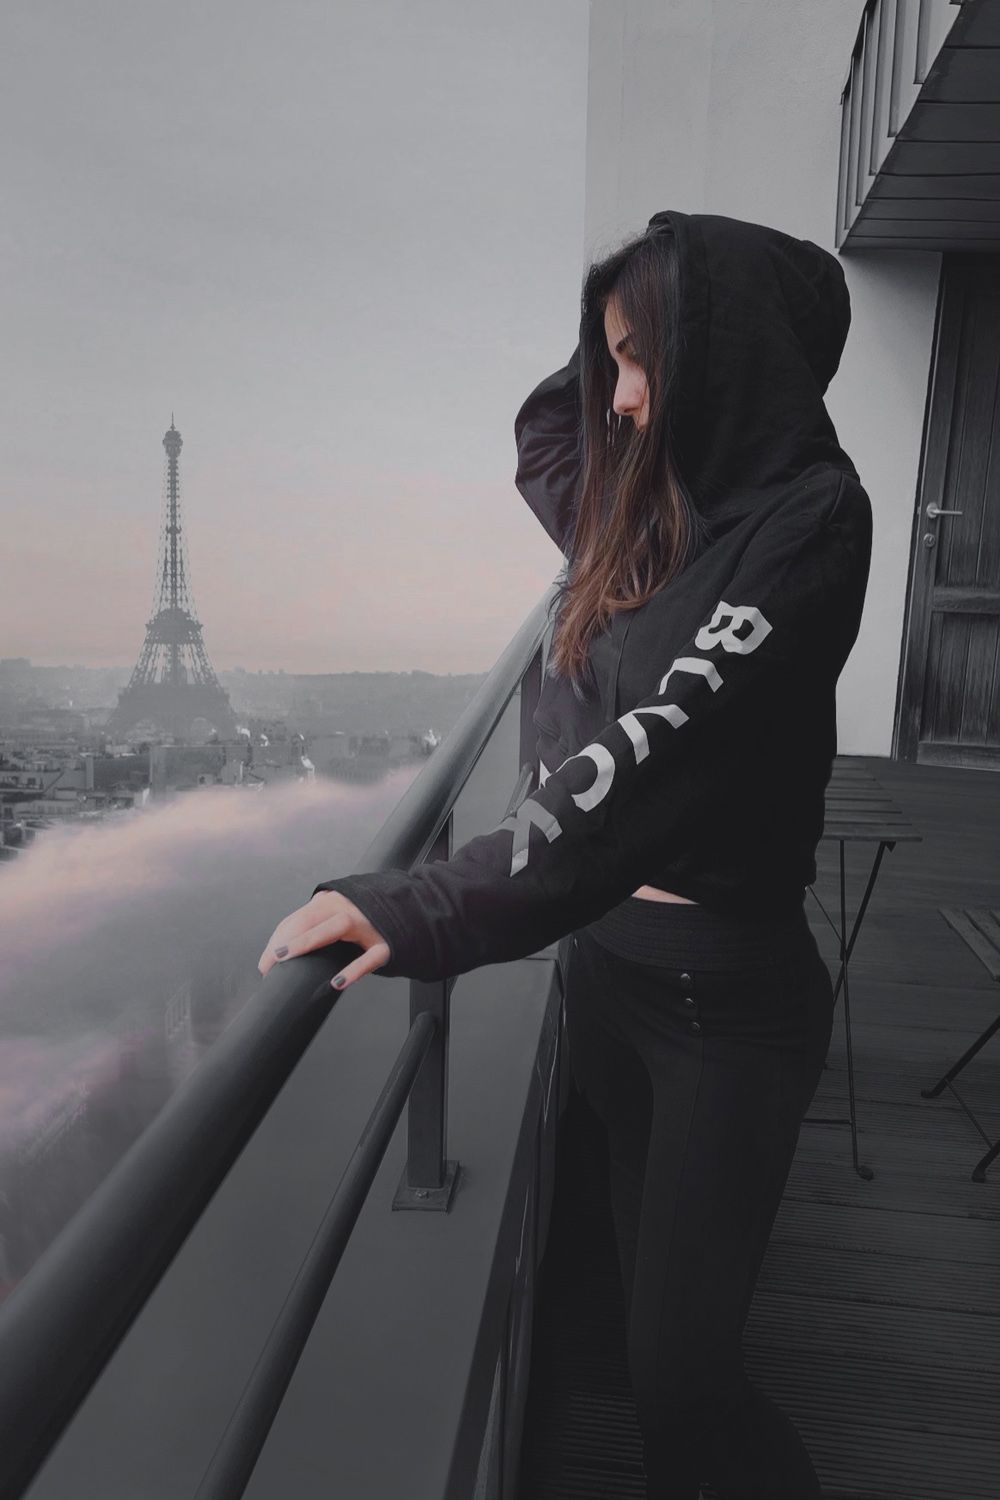 Signature Blvck Hoodie (Cropped). Girl photography, Girl photography poses, Girl photo poses